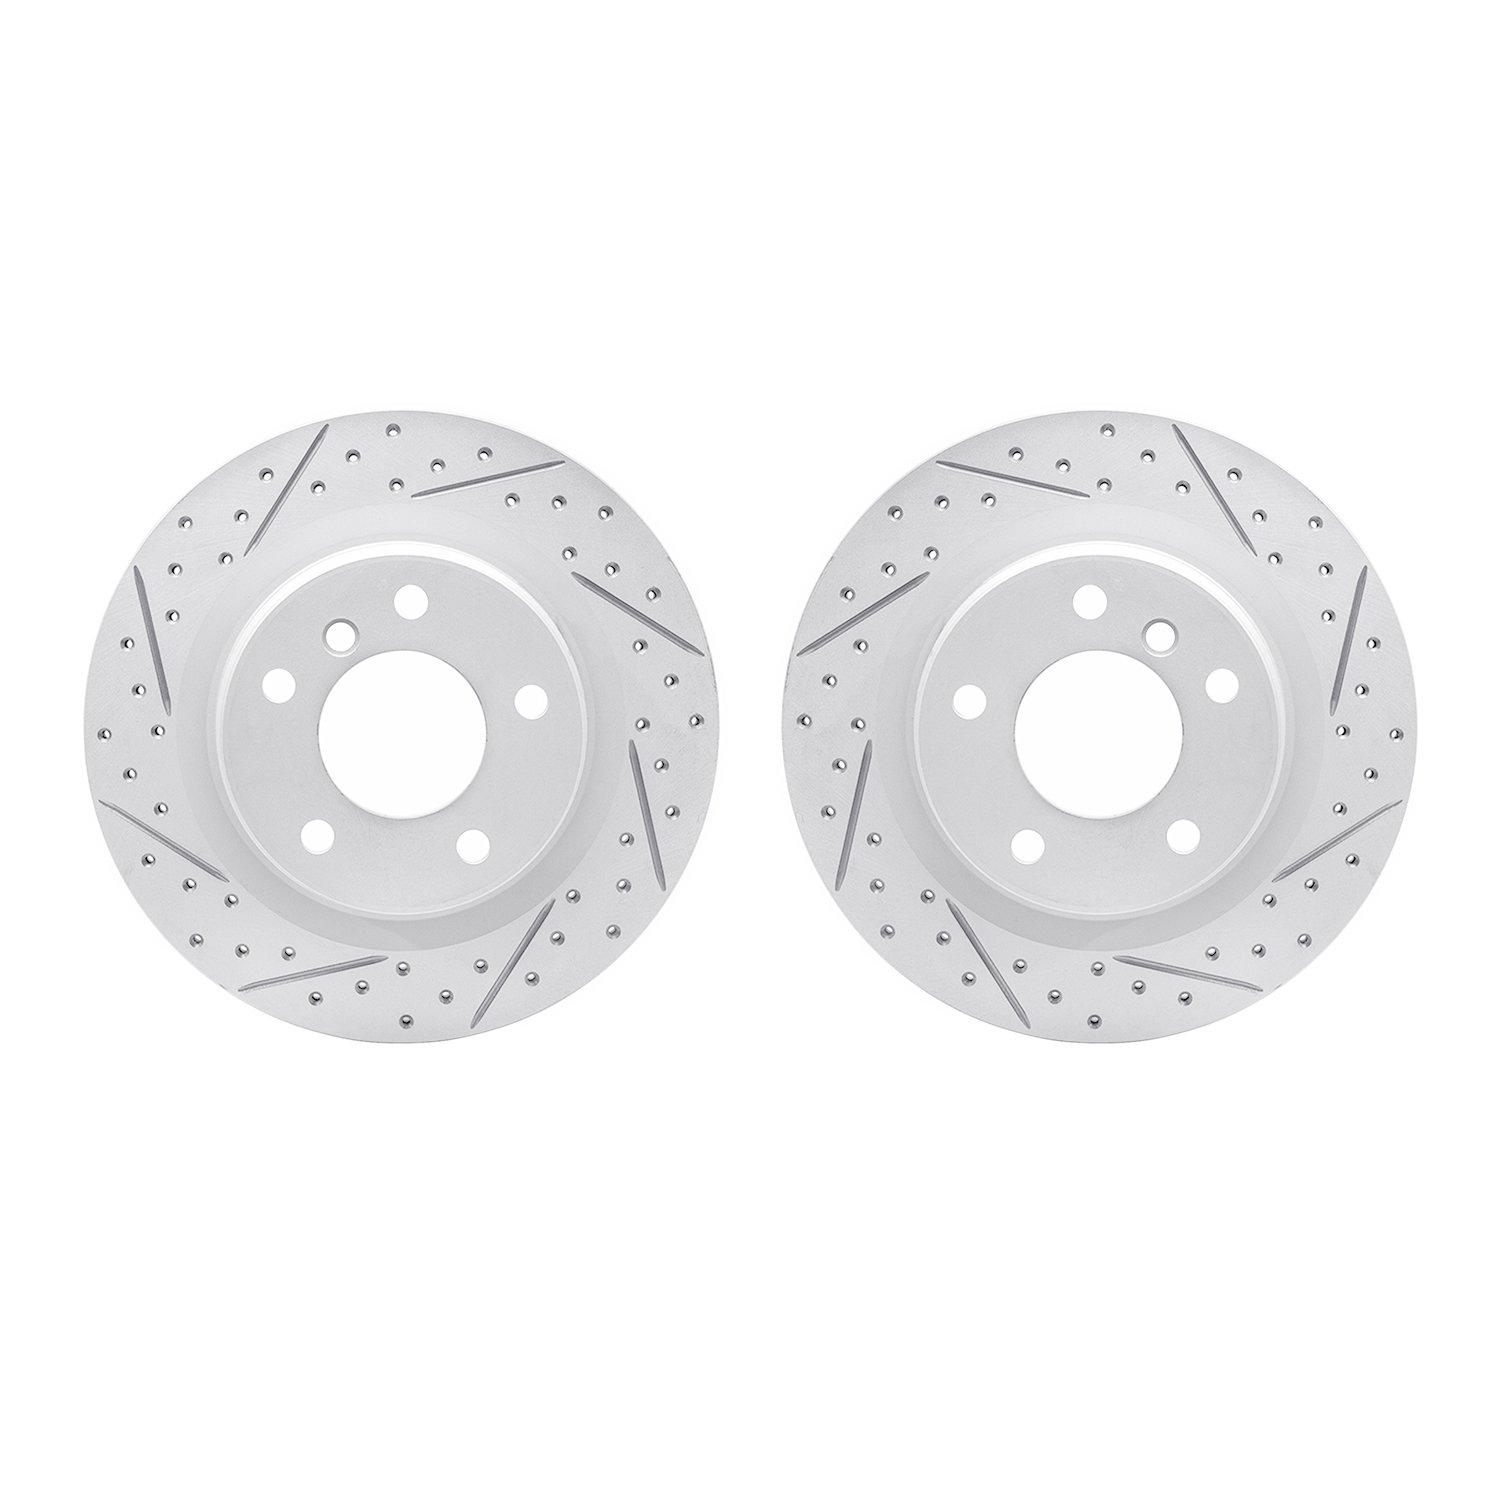 2002-31064 Geoperformance Drilled/Slotted Brake Rotors, 2006-2013 BMW, Position: Rear